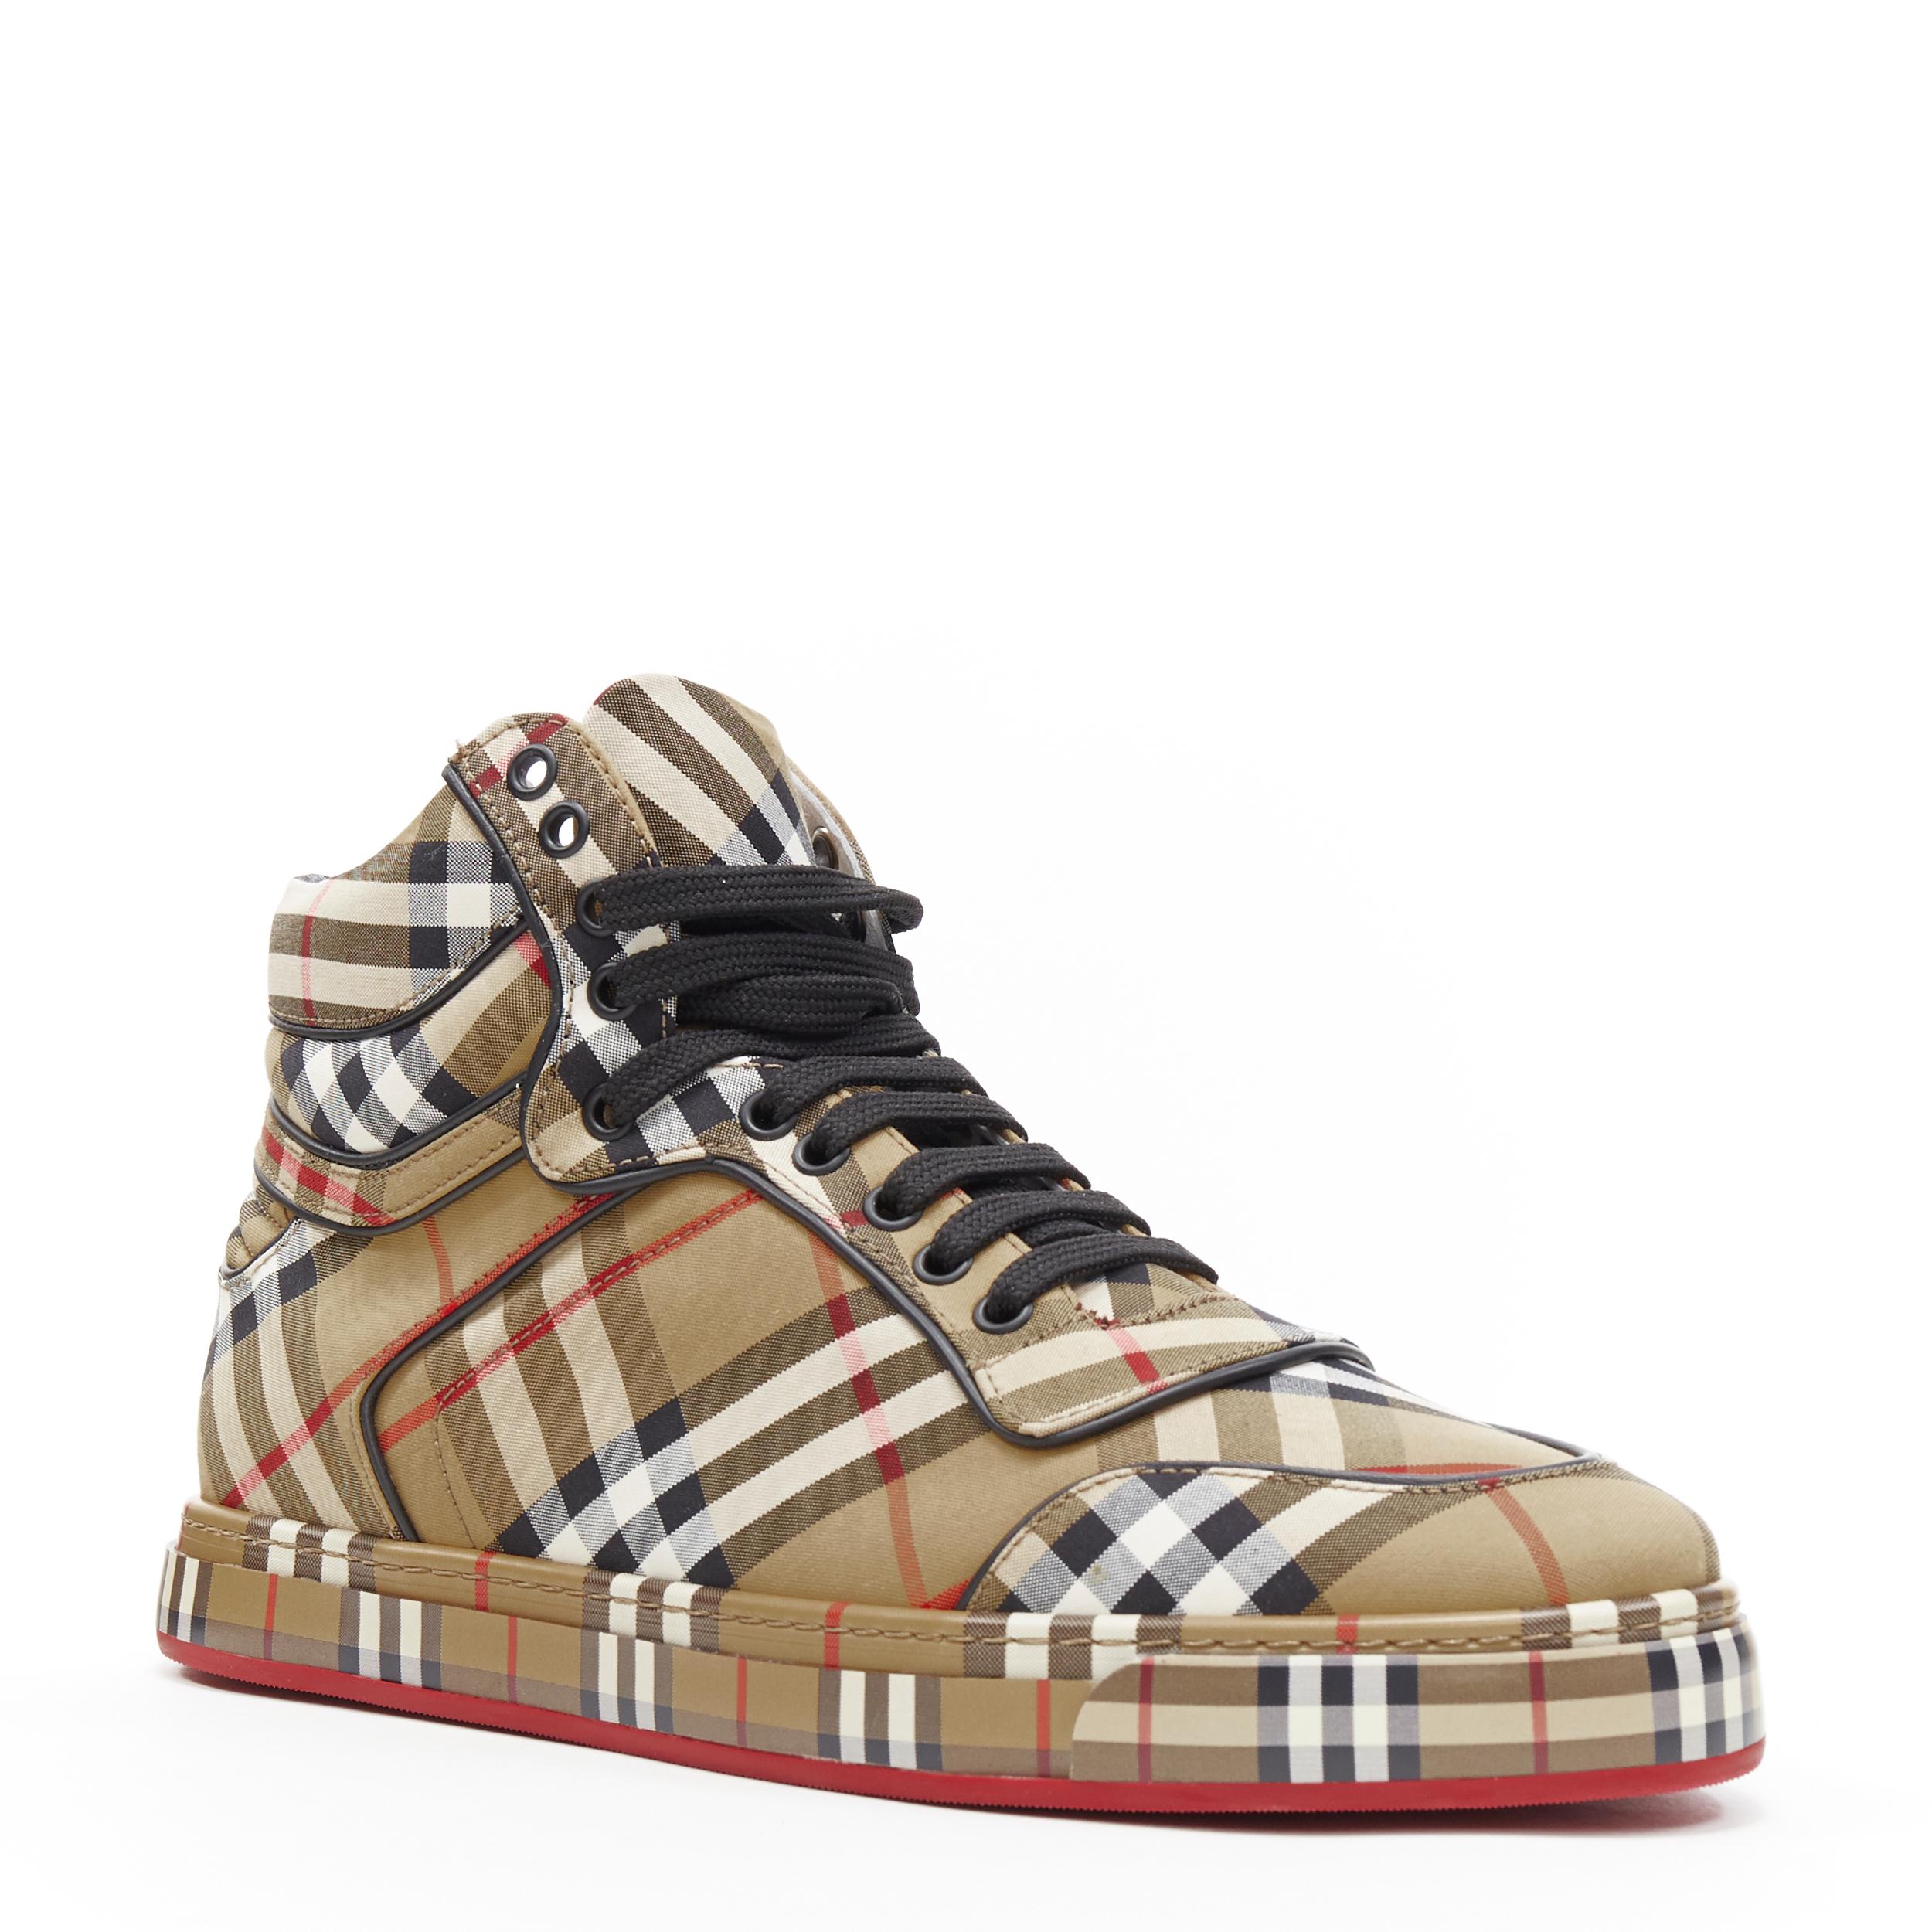 new BURBERRY TISCI Redford Antique Yellow House Check high top sneakers EU45.5
Brand: Burberry
Designer: Riccardo Tisci
Collection: 2019
Model Name / Style: Redford
Material: Cotton
Color: Brown
Pattern: Check
Closure: Lace up
Lining material: